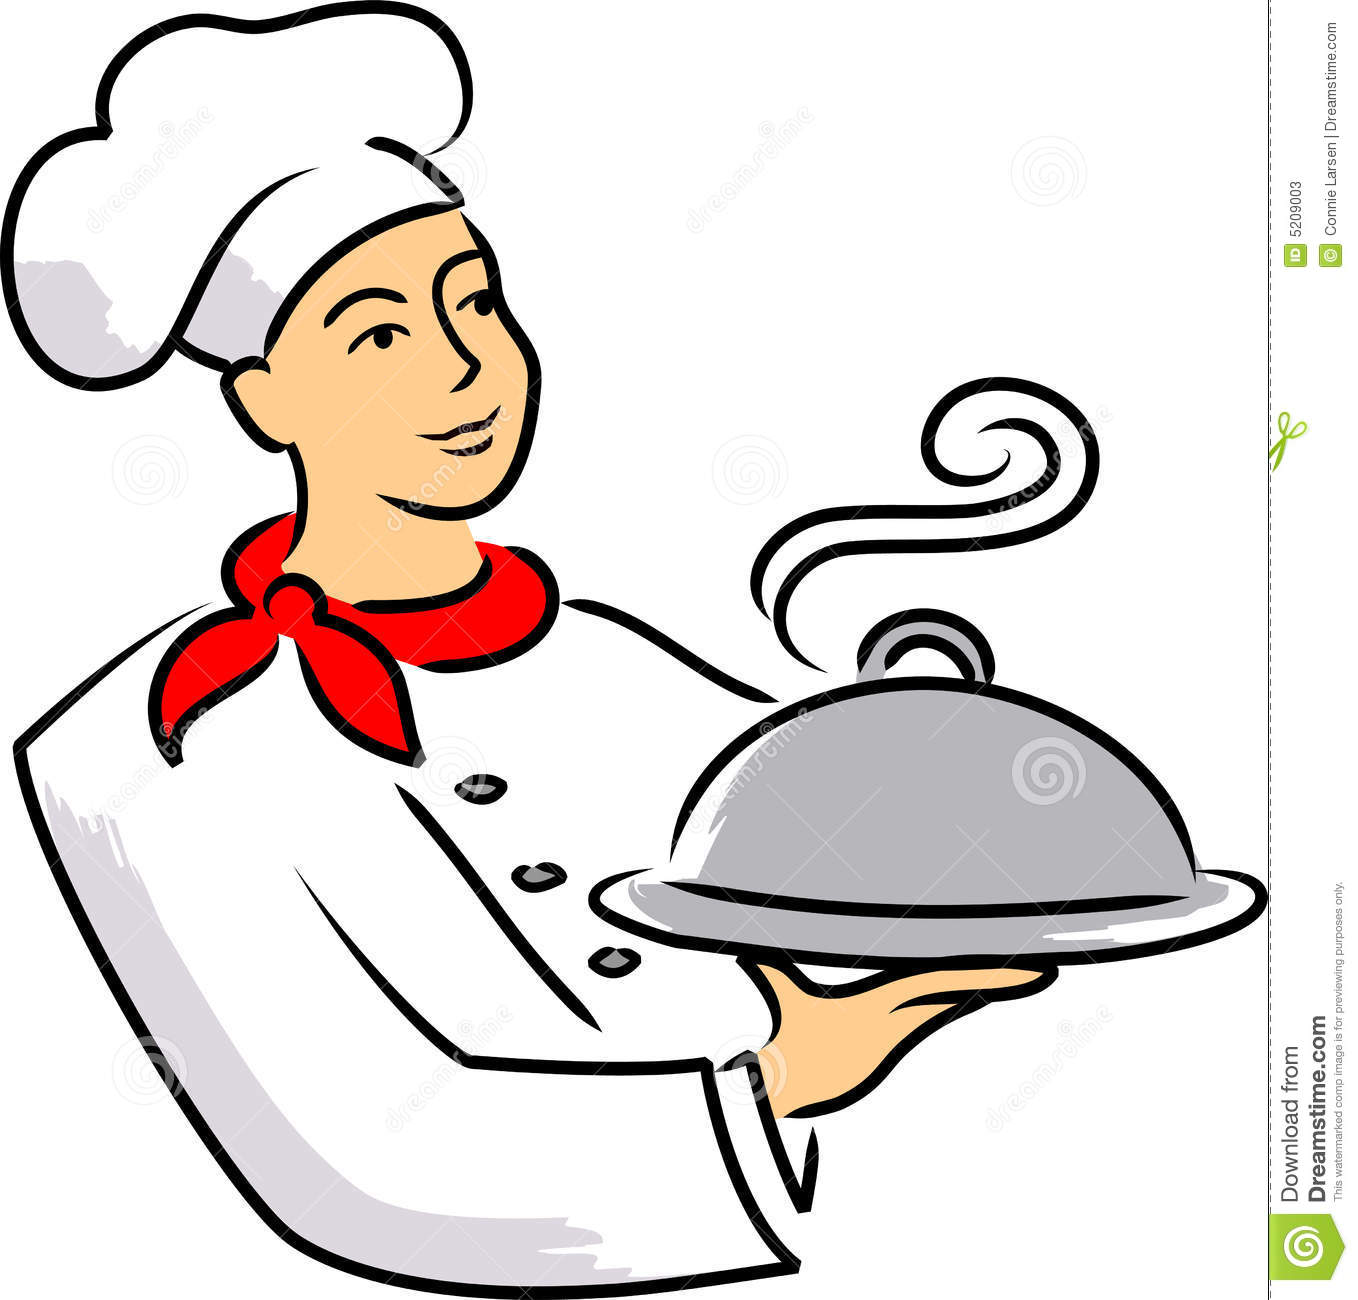 Cartoon Illustration Of A Chef Carrying A Covered Plate Of Food